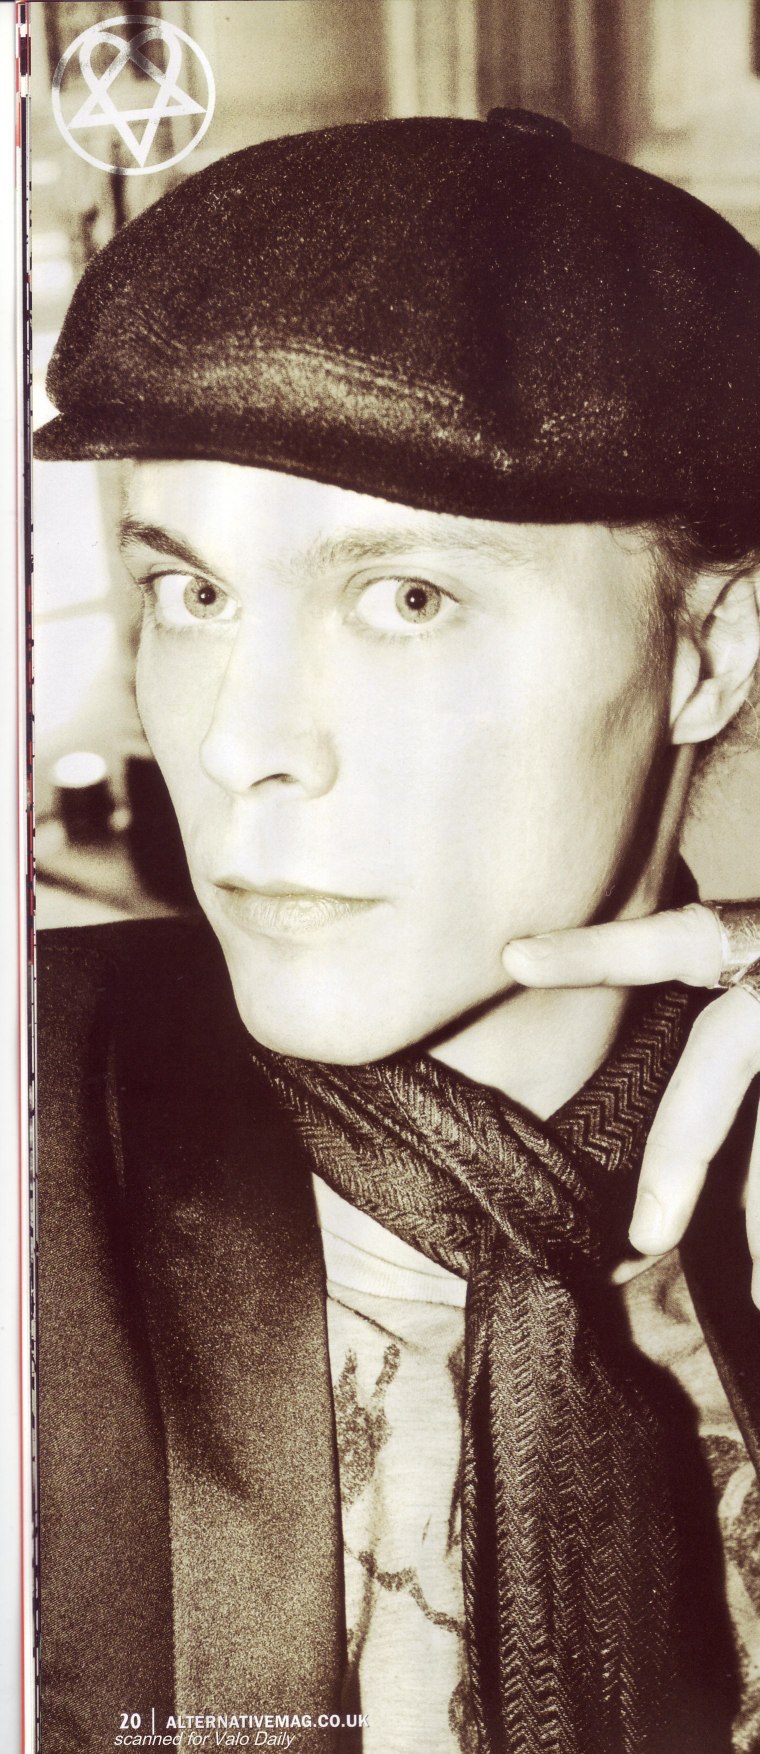 Daily ville valo HIM Daily